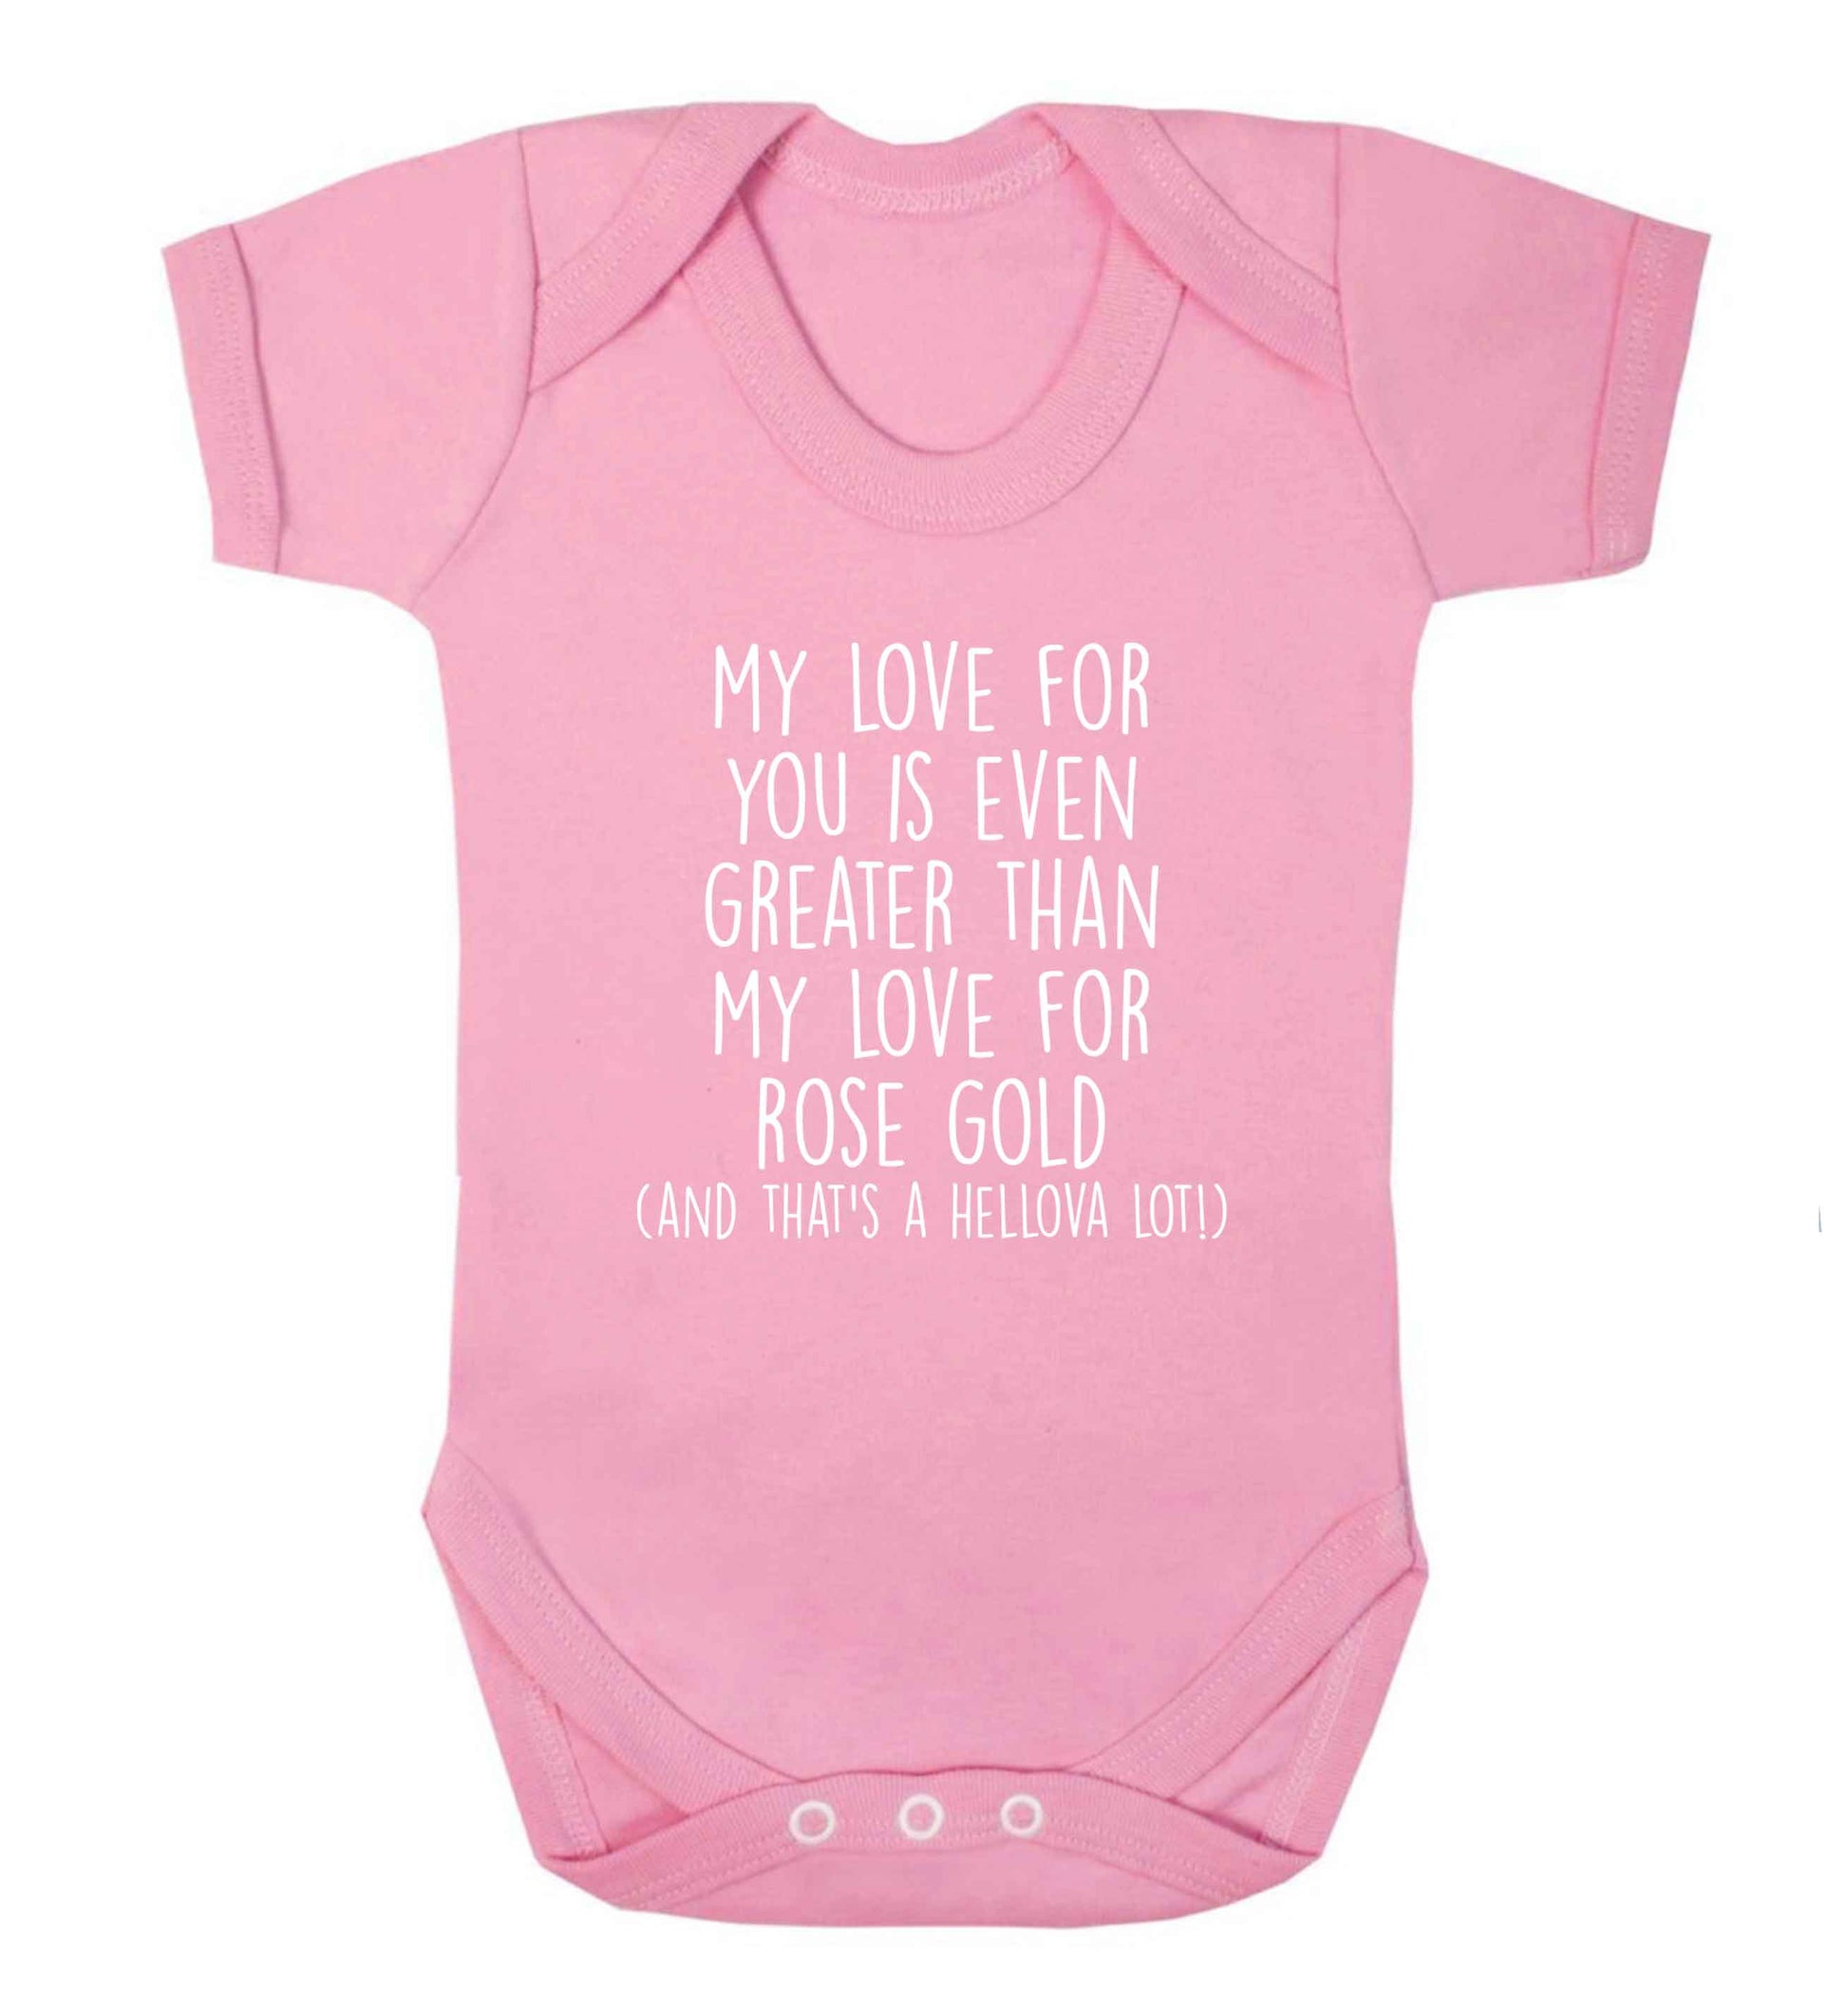 My love for you is even greater than my love for rose gold (and that's a hellova lot) baby vest pale pink 18-24 months